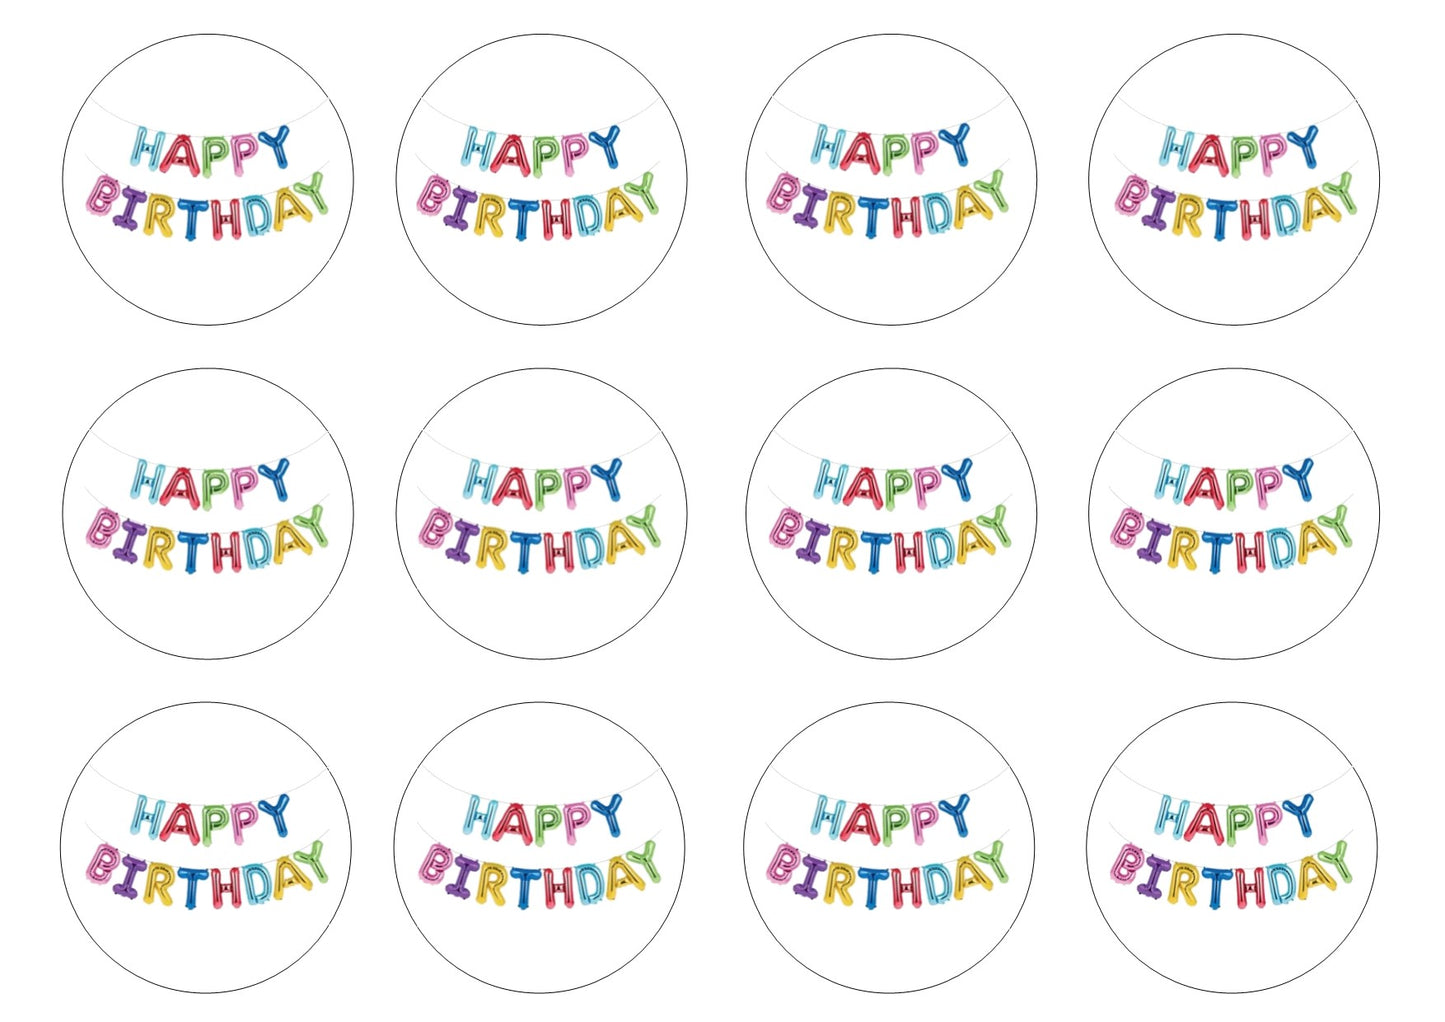 Happy Birthday (HB02) 2" pre cut icing discs  Pack contains 12 edible fondant icing pre cut icing discs  Easy to decorate a homemade or shop bought cake - simply peel and apply to your cakes